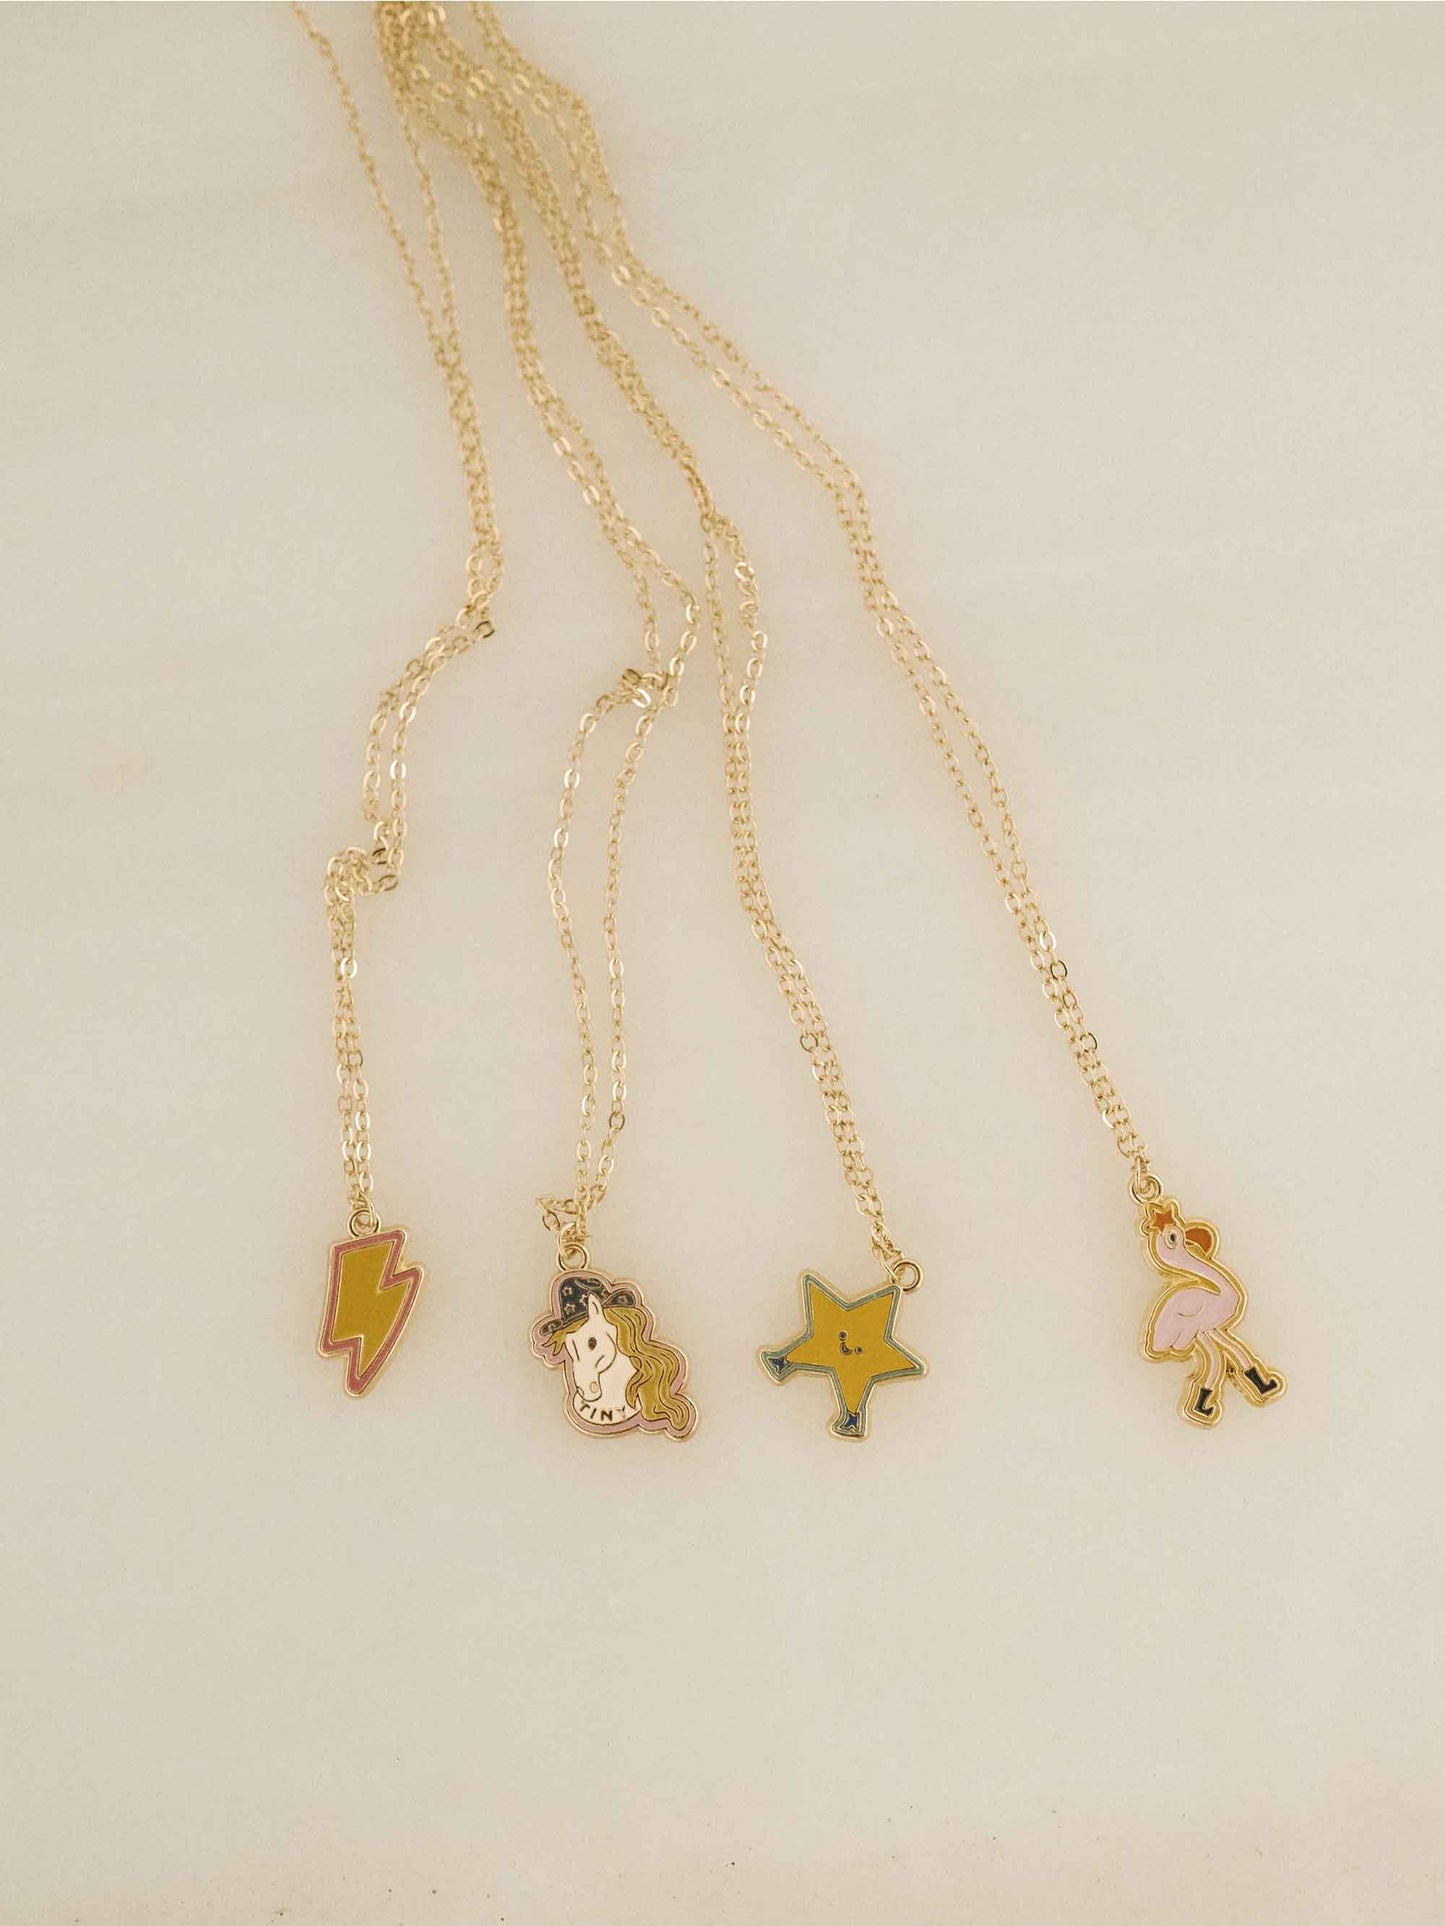 Dancing Star Necklace